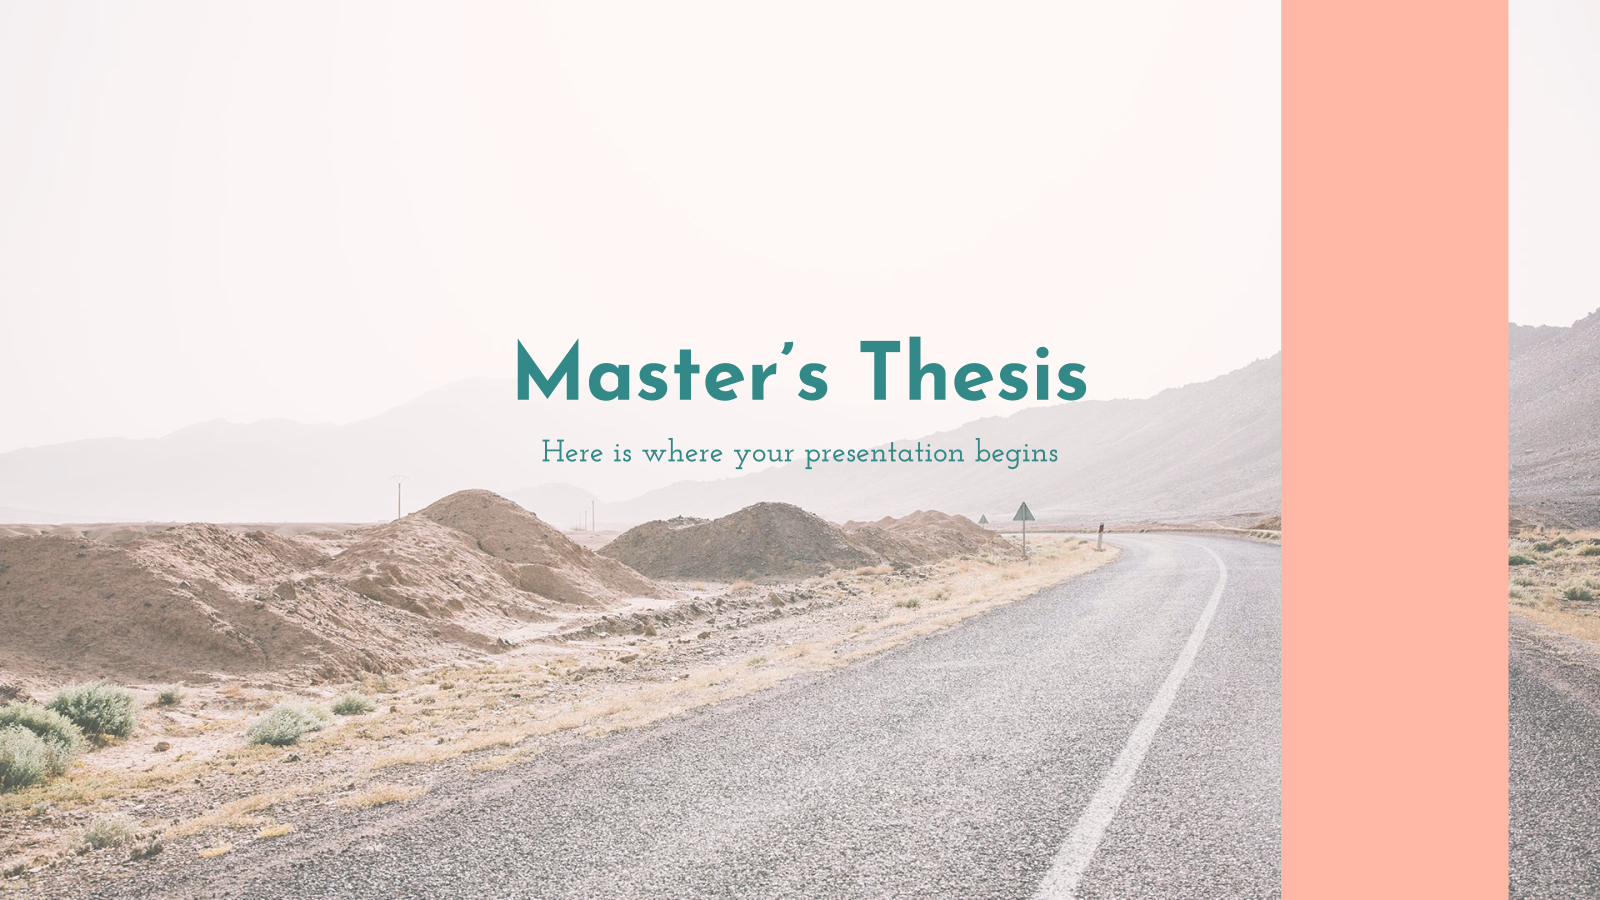 Master's Thesis Theme For Google Slides And Powerpoint Within Powerpoint Templates For Thesis Defense